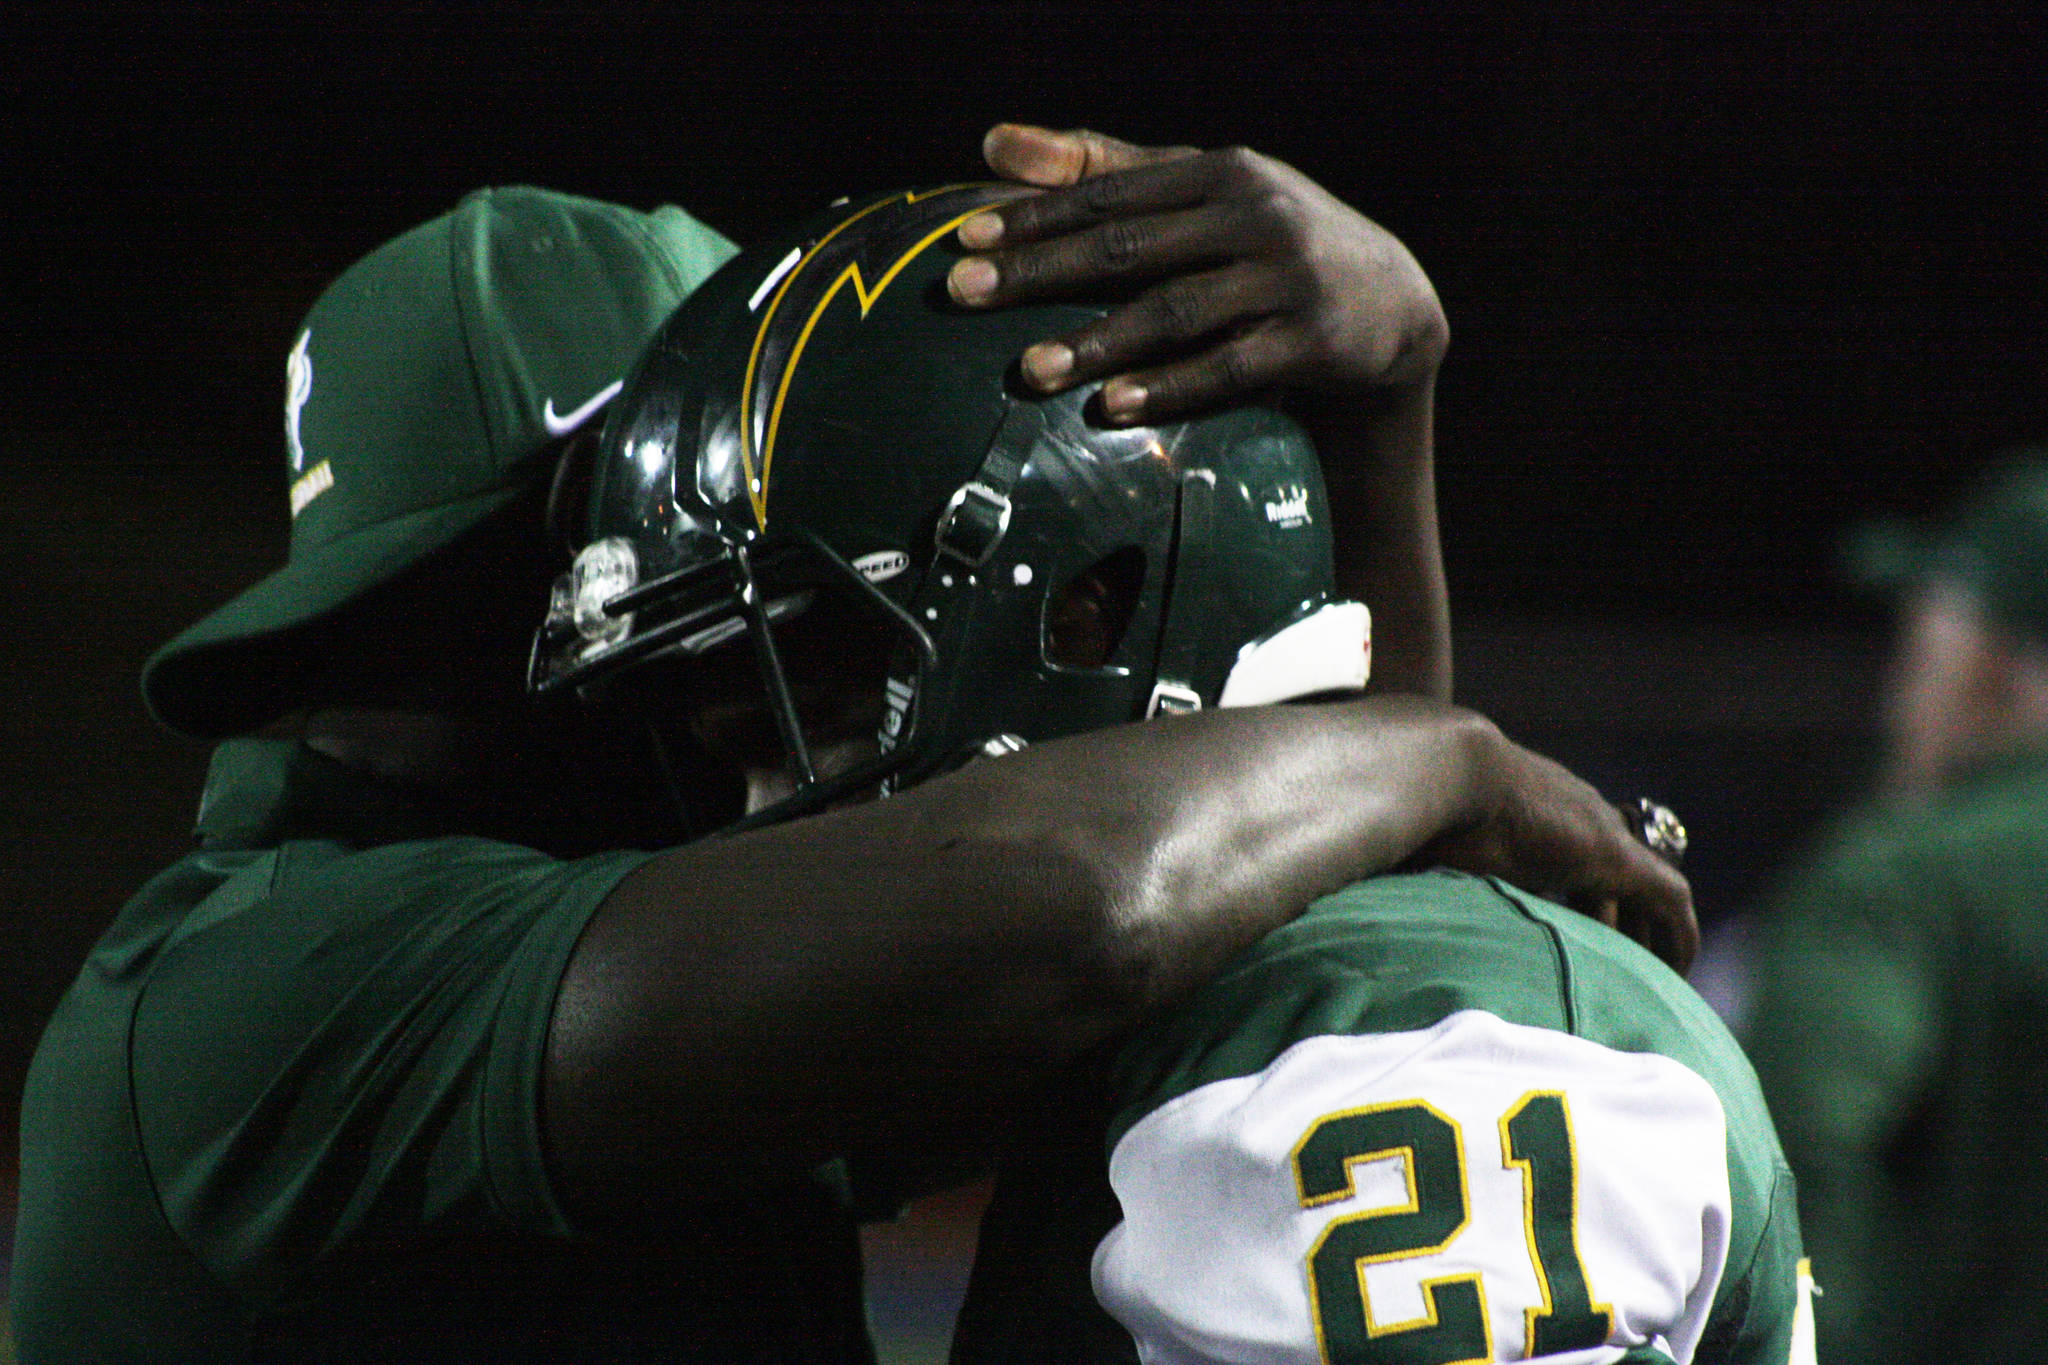 Kentridge assistant coach Victor Tolbert consoles Jeremy Banks during the Chargers’ 38-20 NPSL loss to Kentlake on Friday night. MARK KLAAS, Kent Reporter